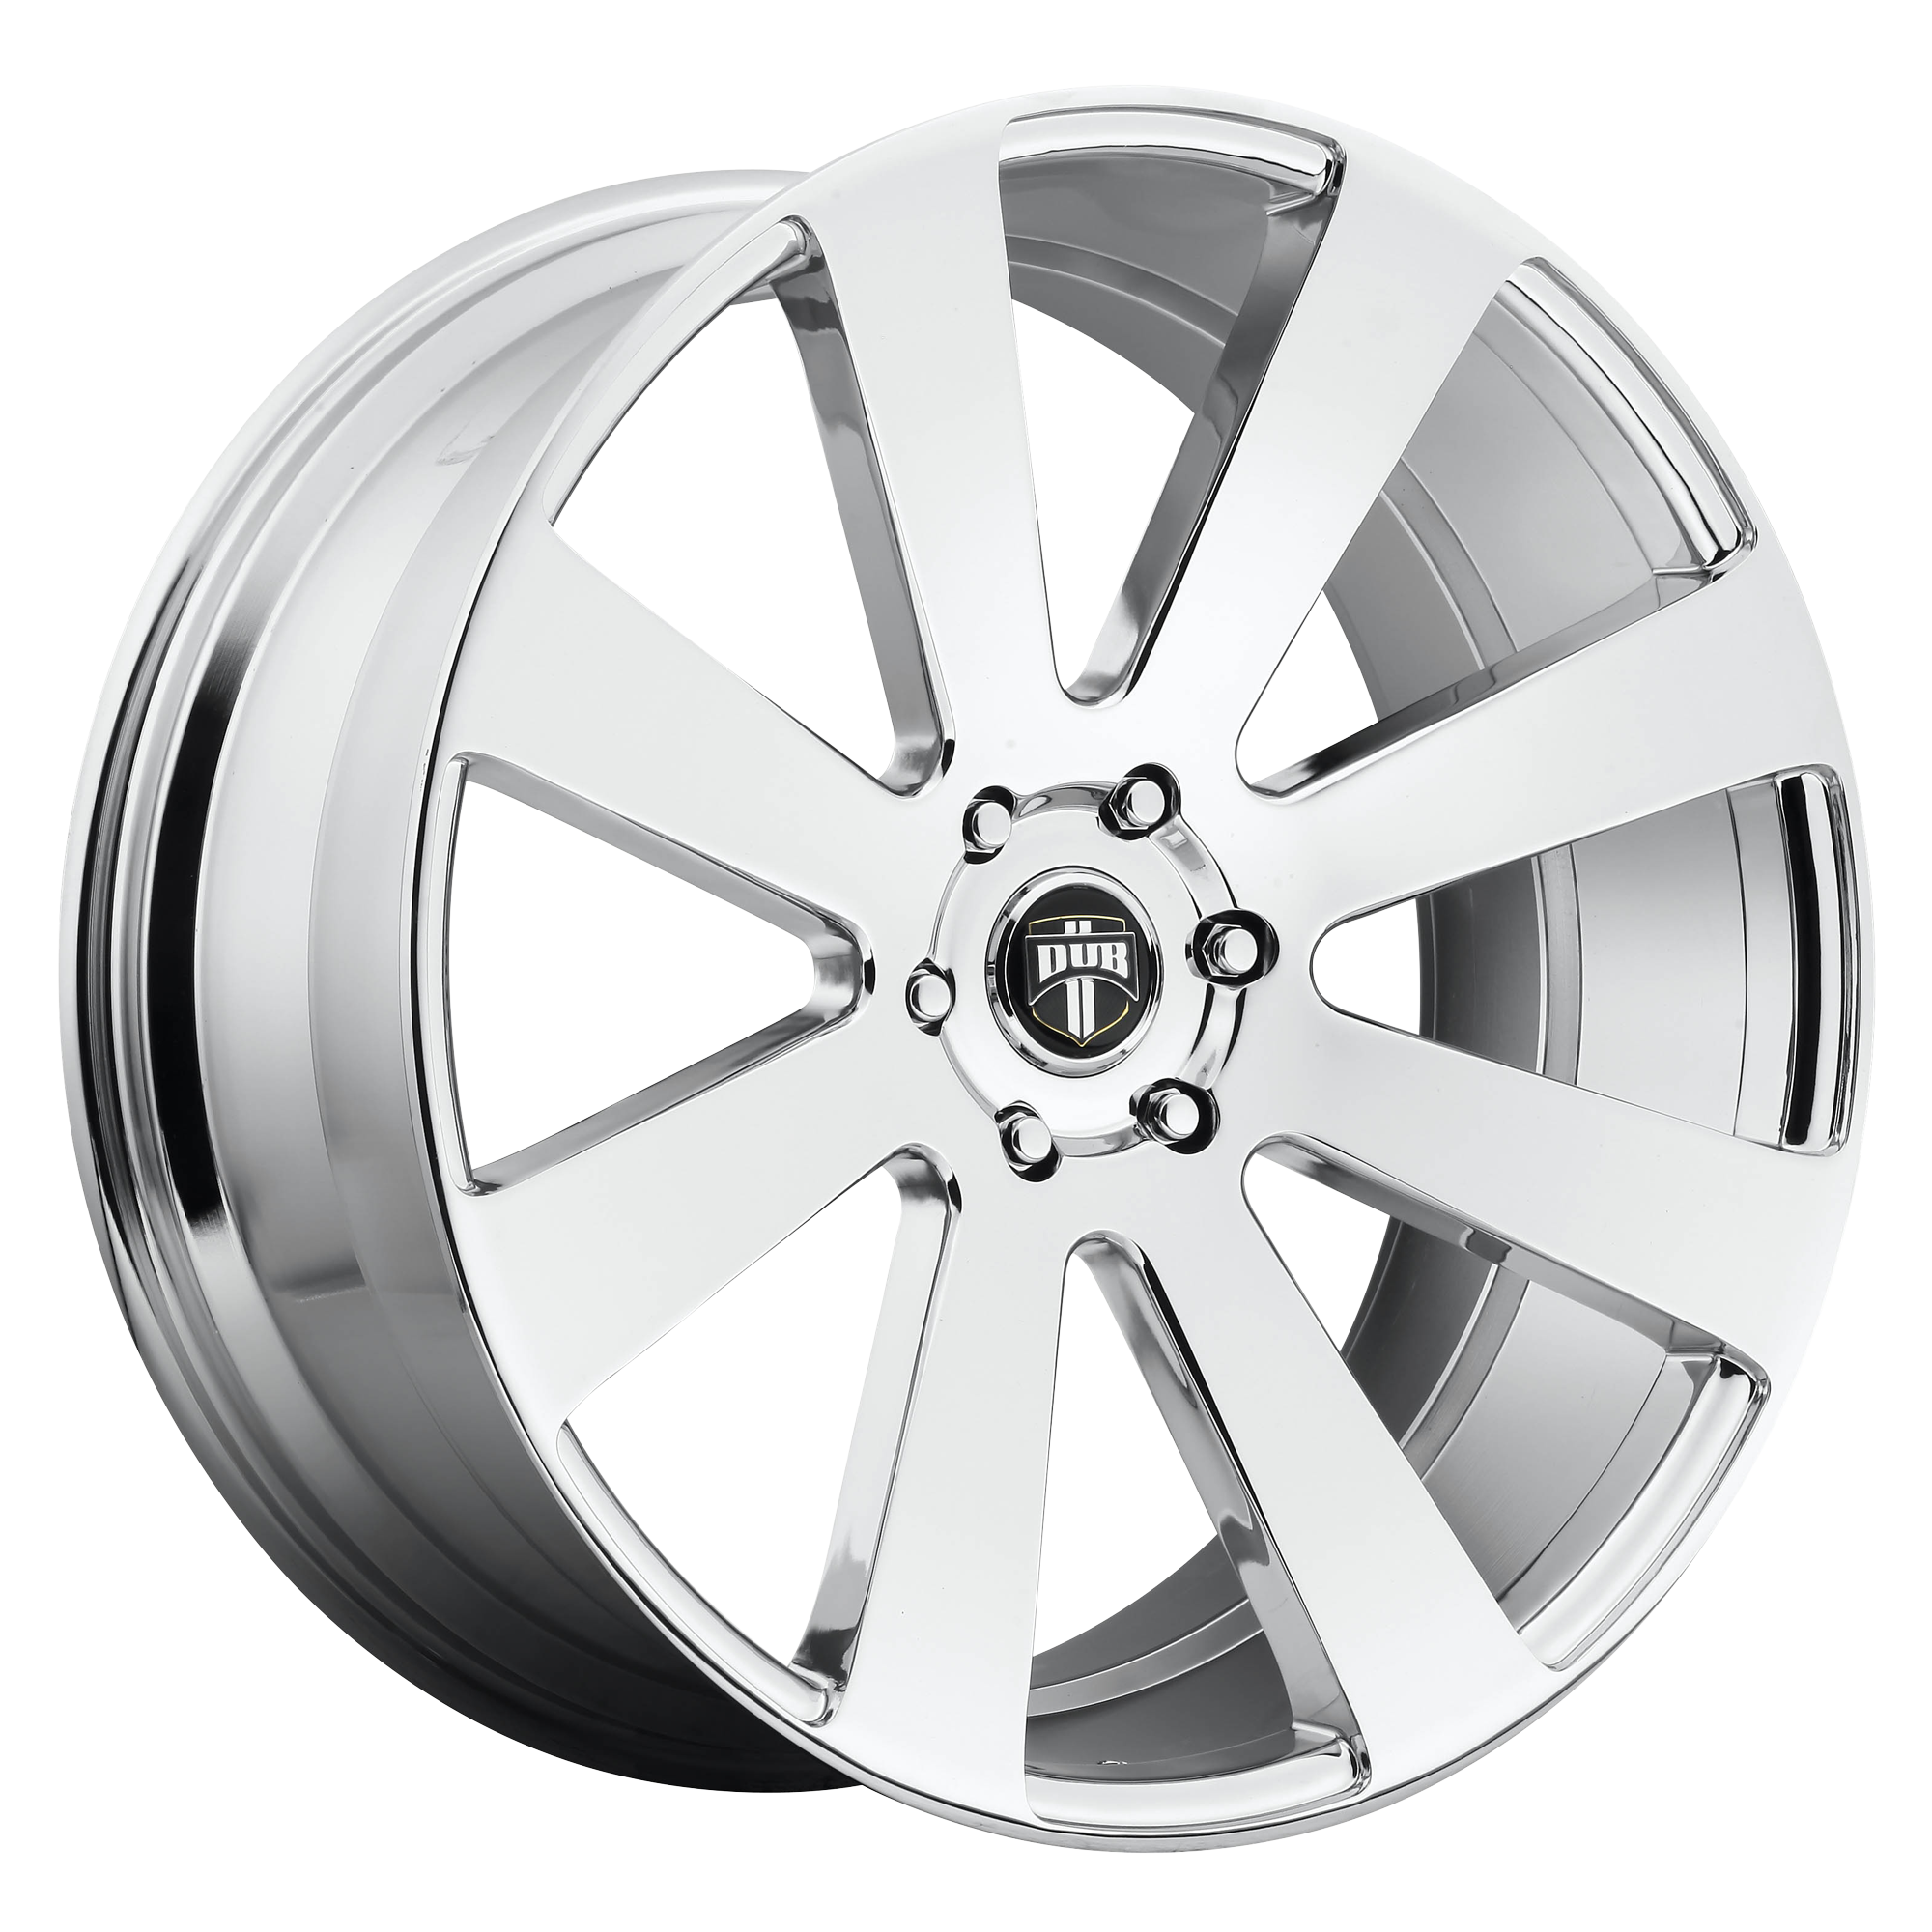 8-BALL 22x9.5 6x139.70 CHROME PLATED (20 mm) - Tires and Engine Performance